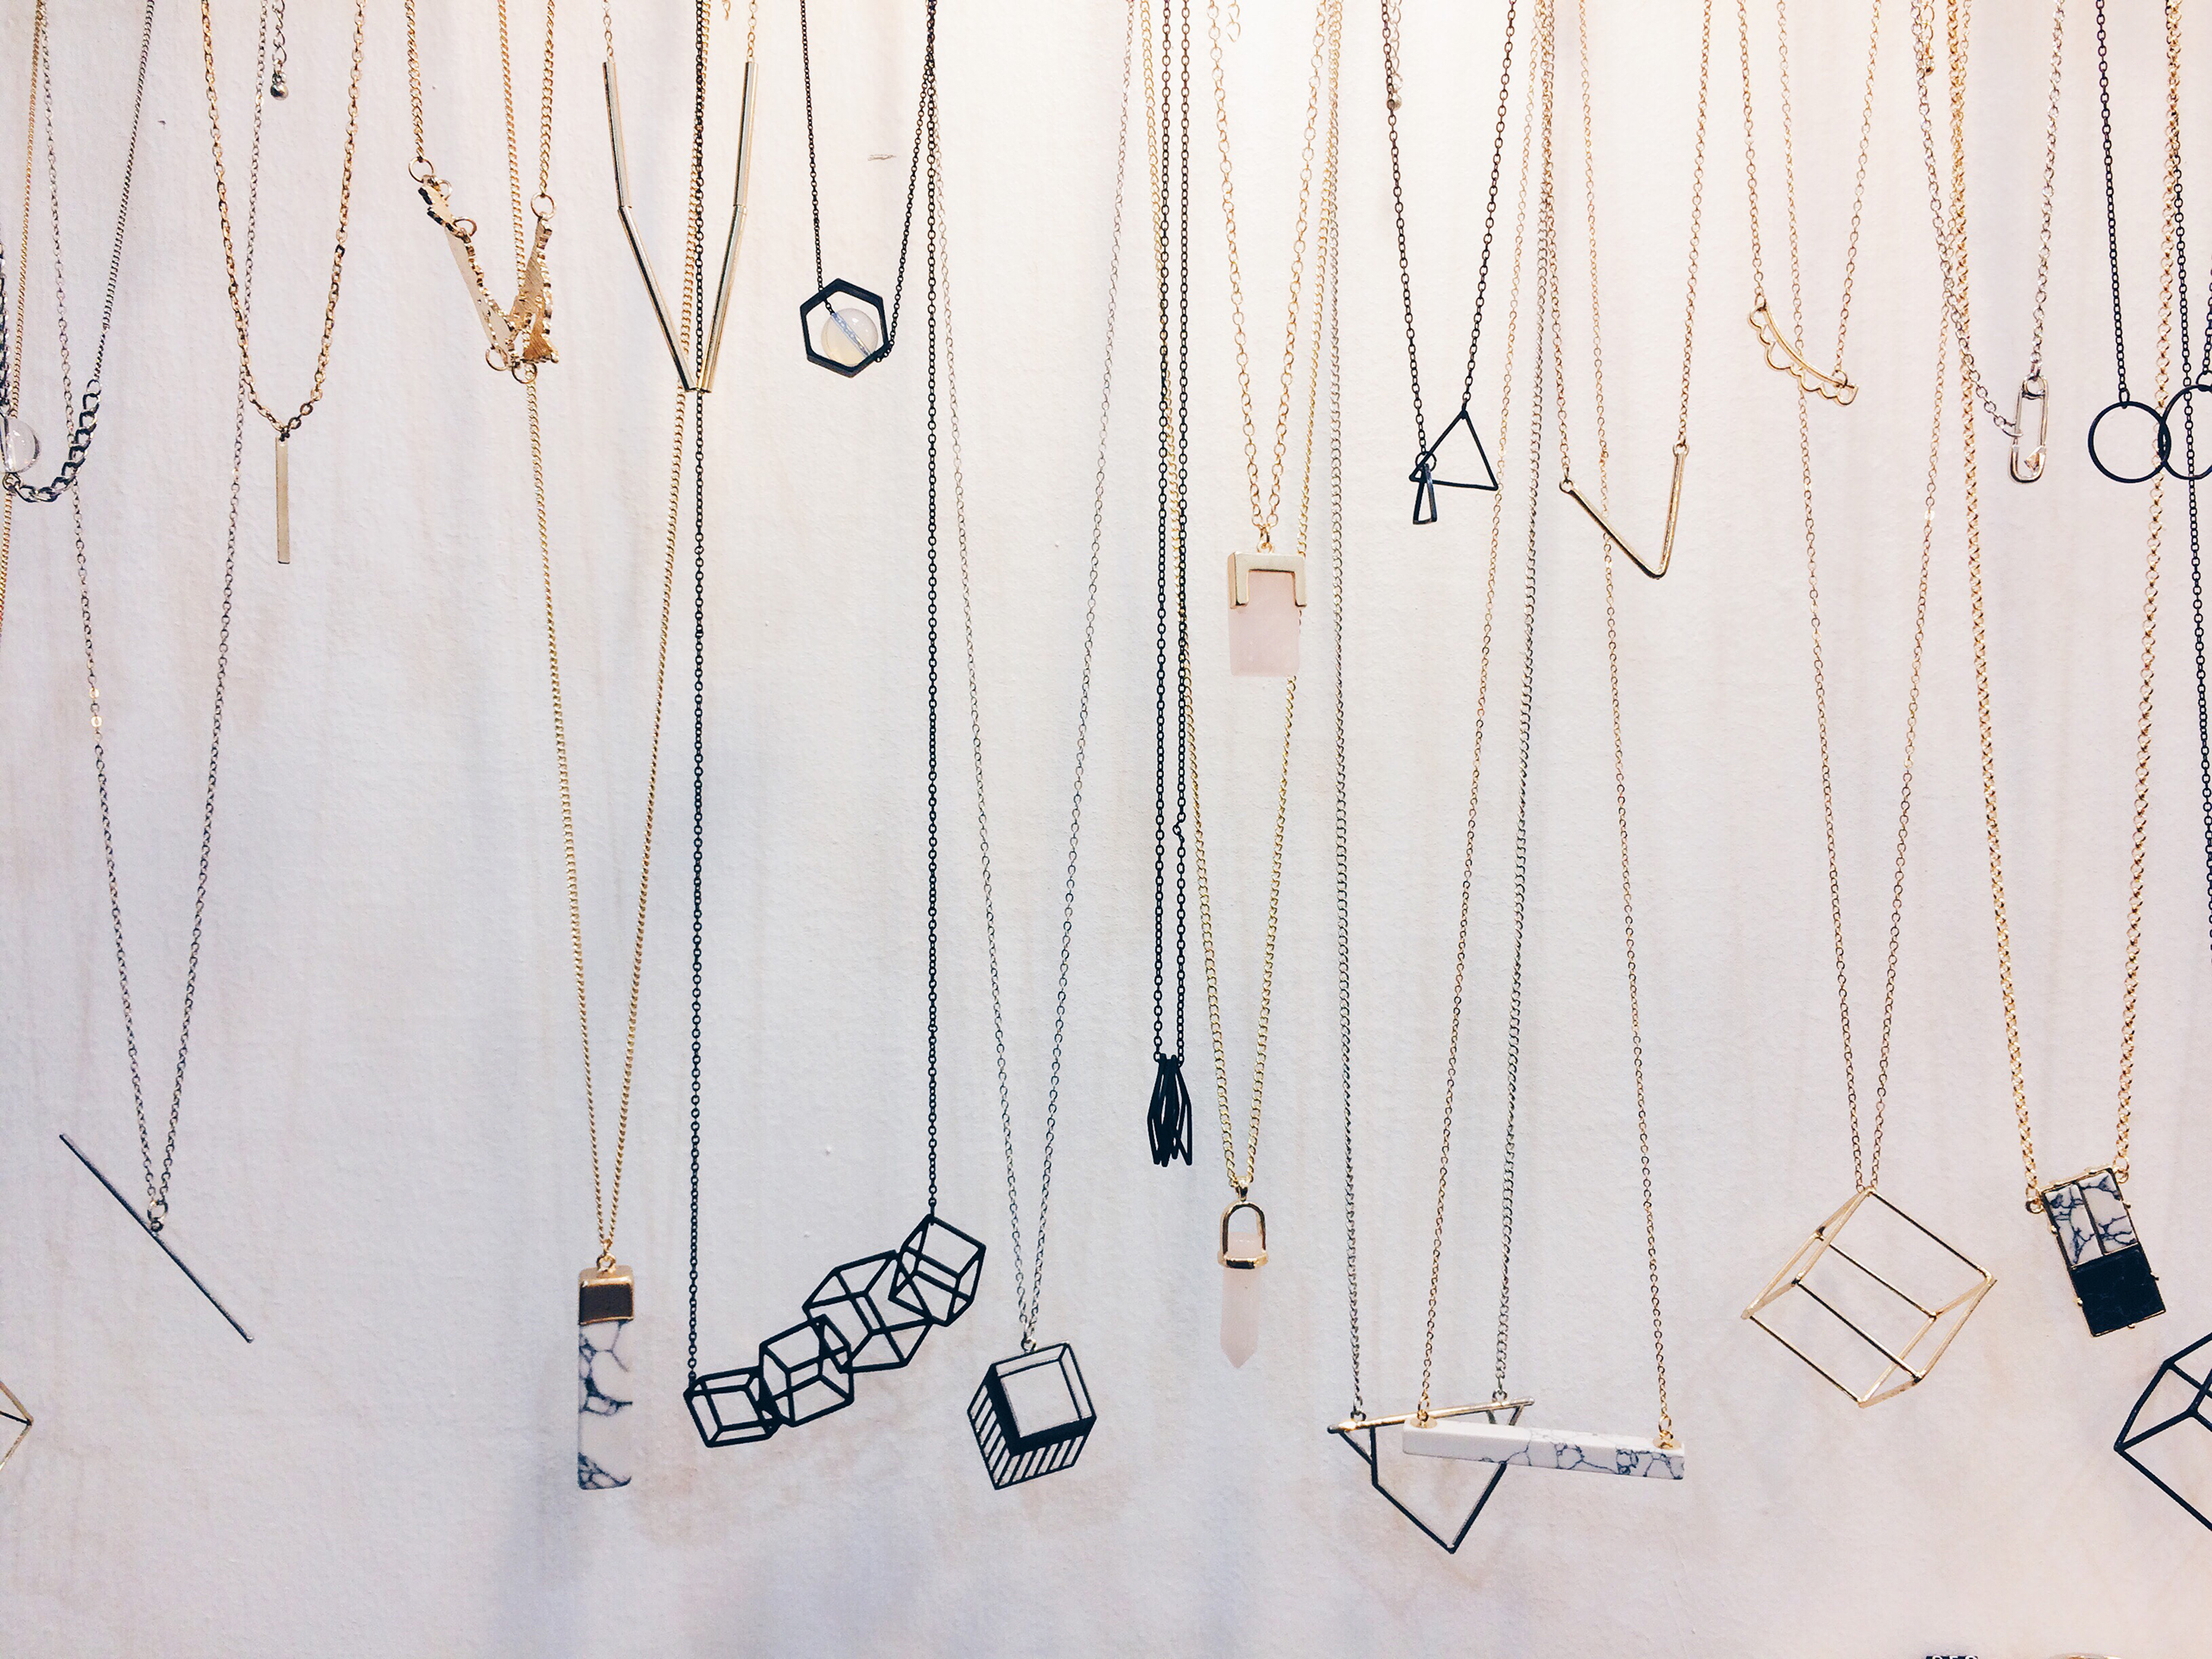 WHY DO WE CHOOSE MINIMALIST NECKLACES?